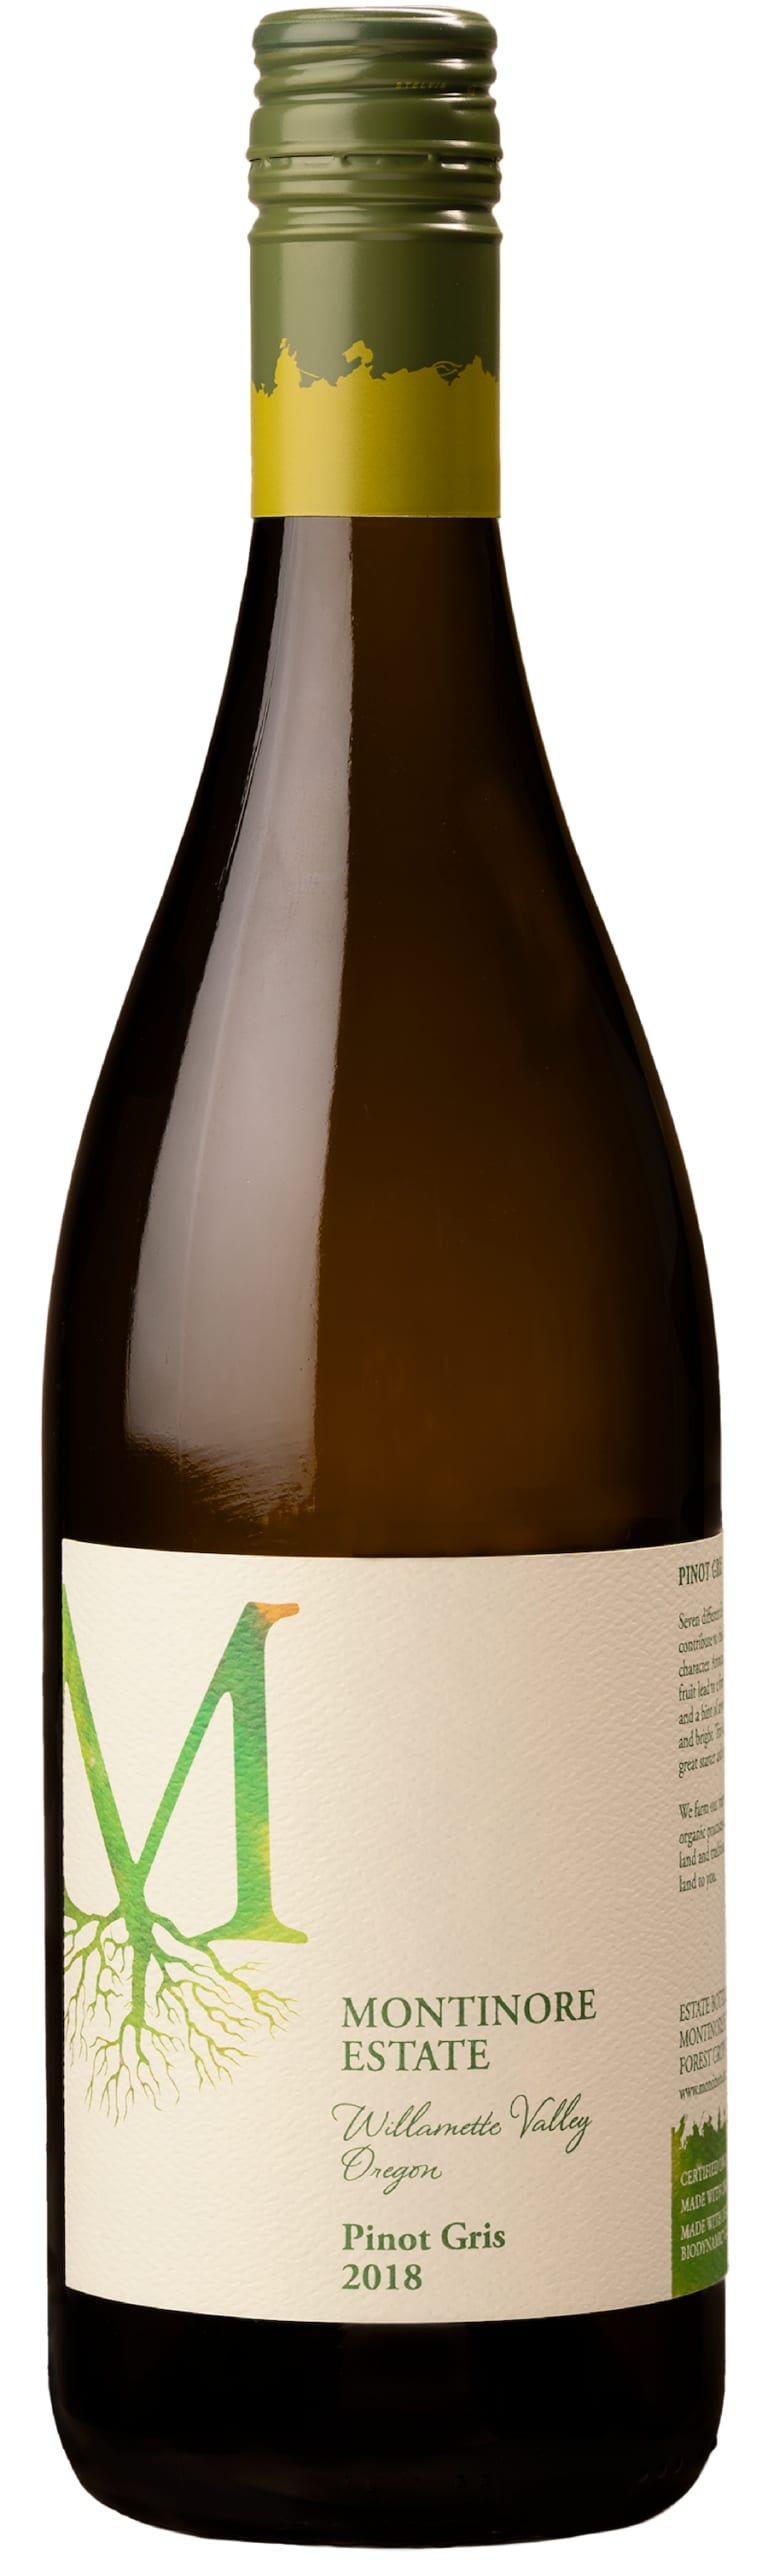 Montinore Estate Pinot Gris 2016